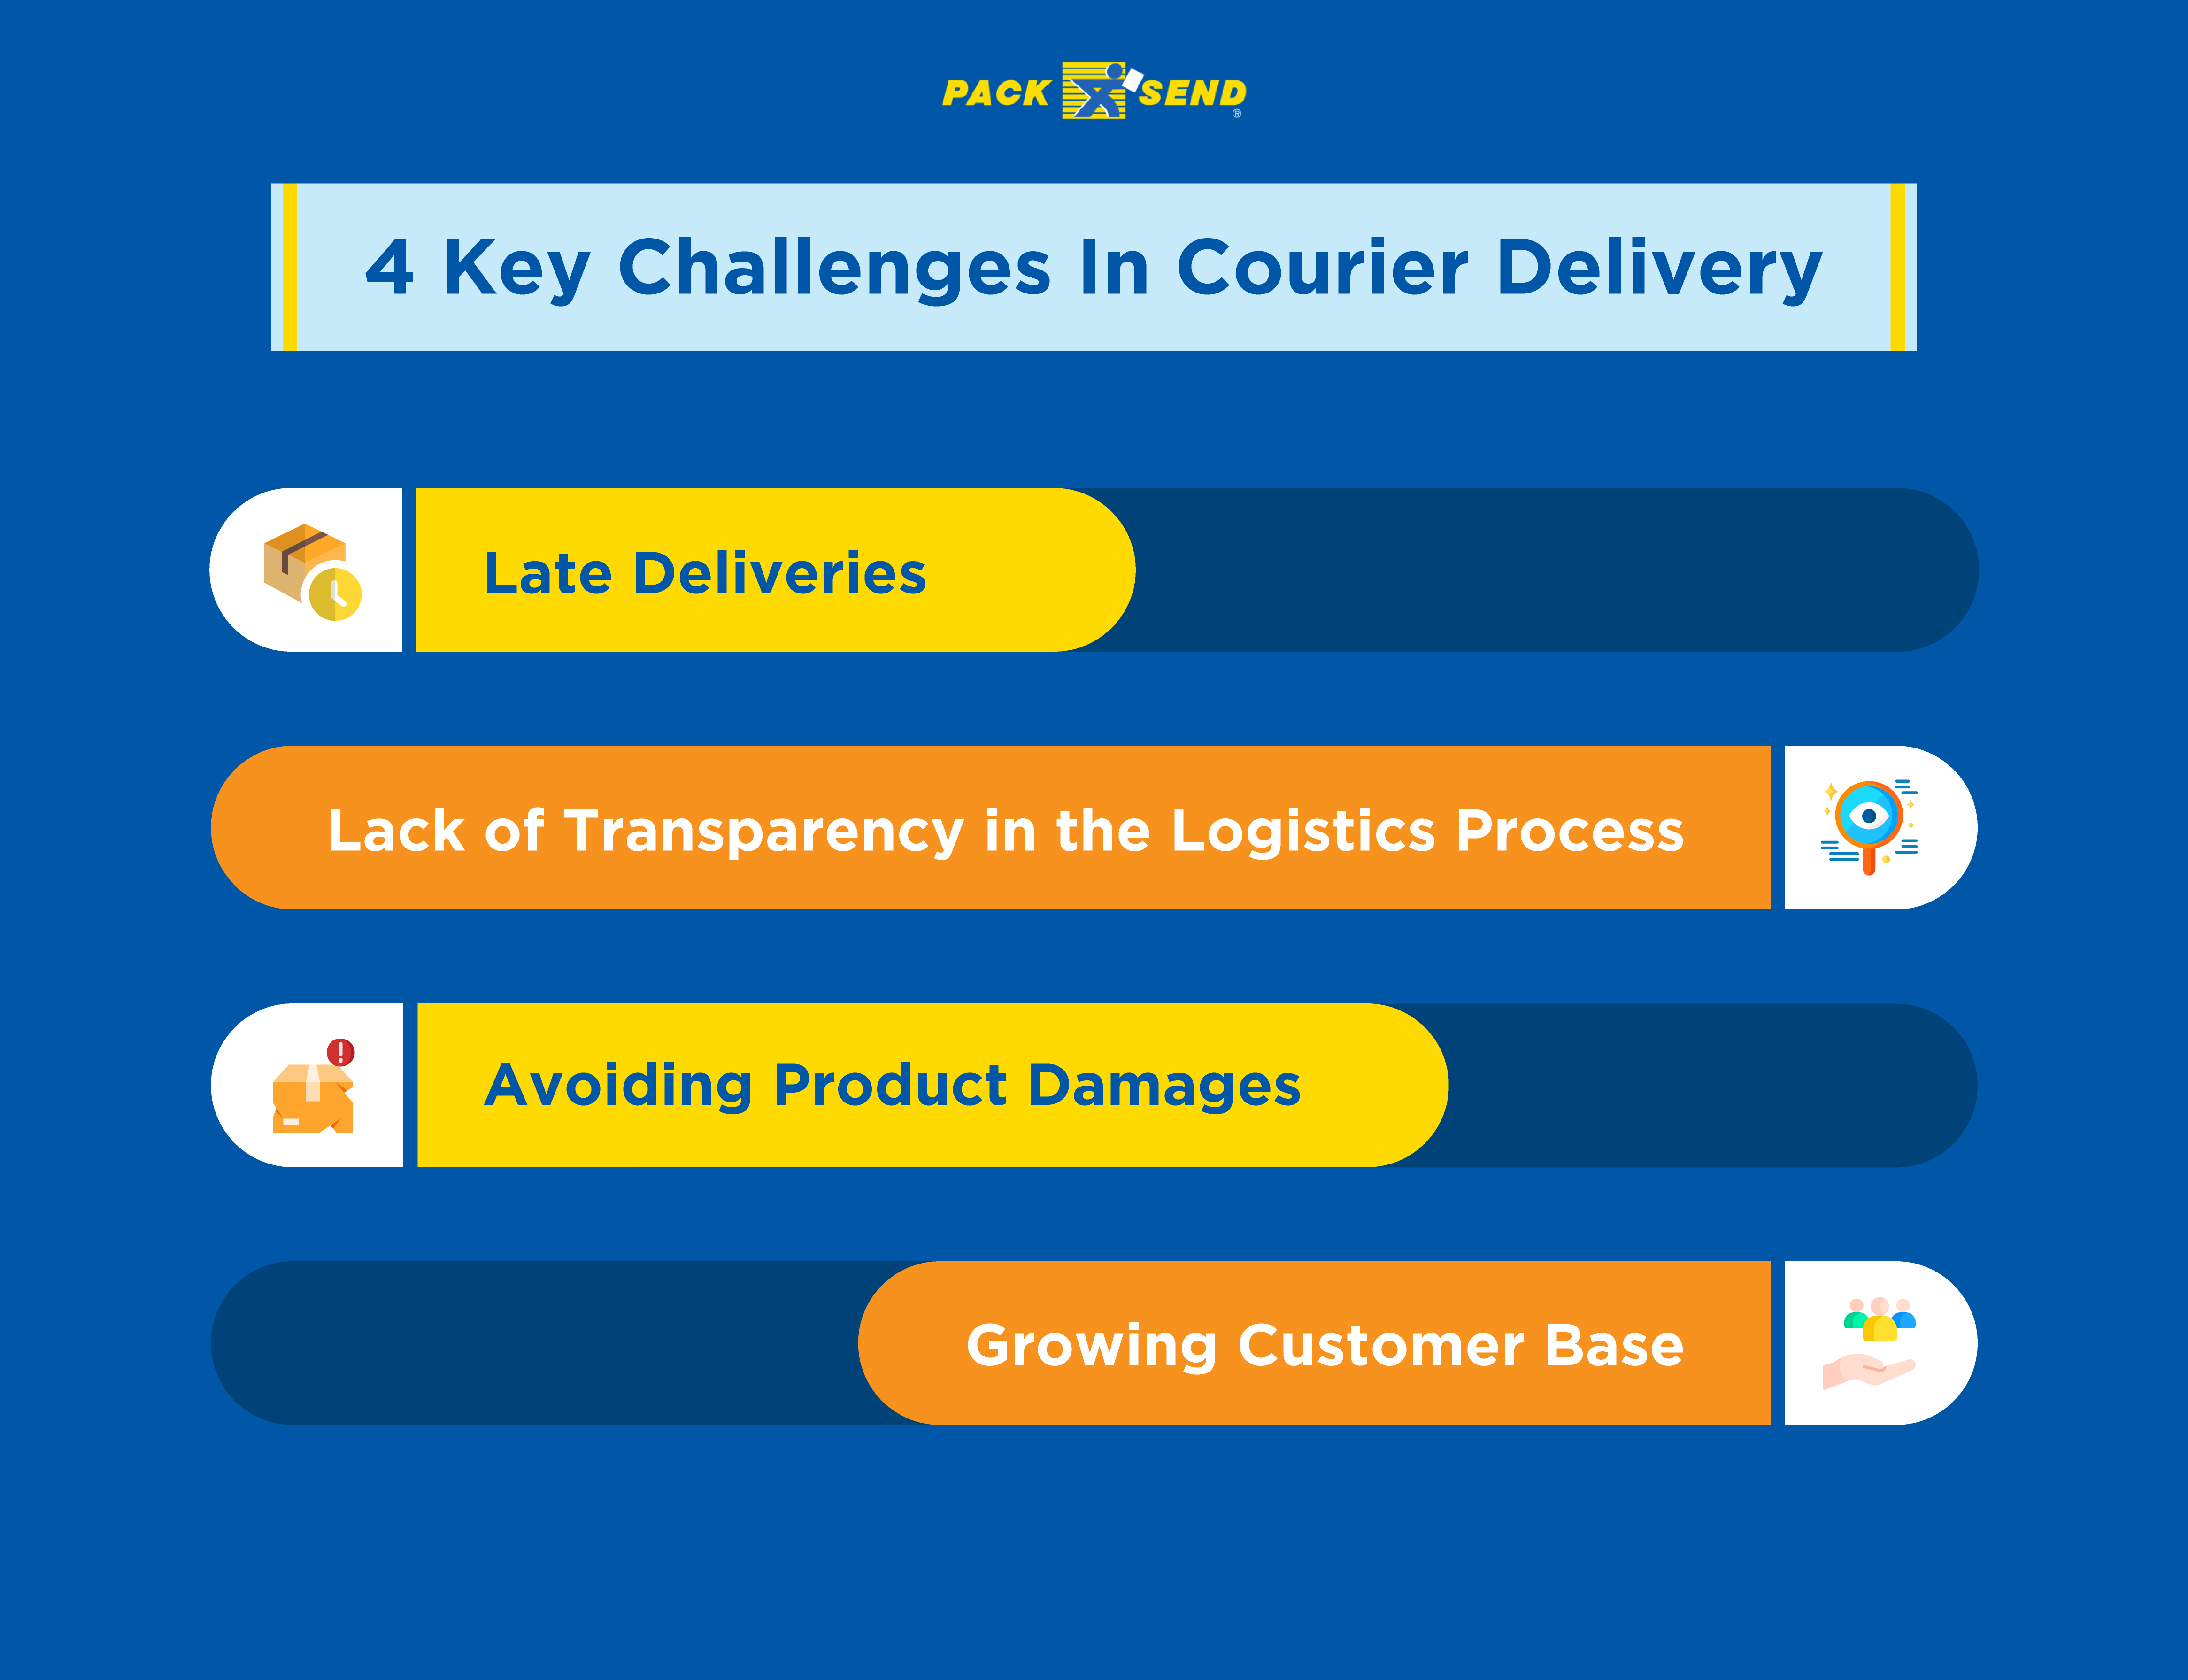 4 Key Challenges In Courier Delivery